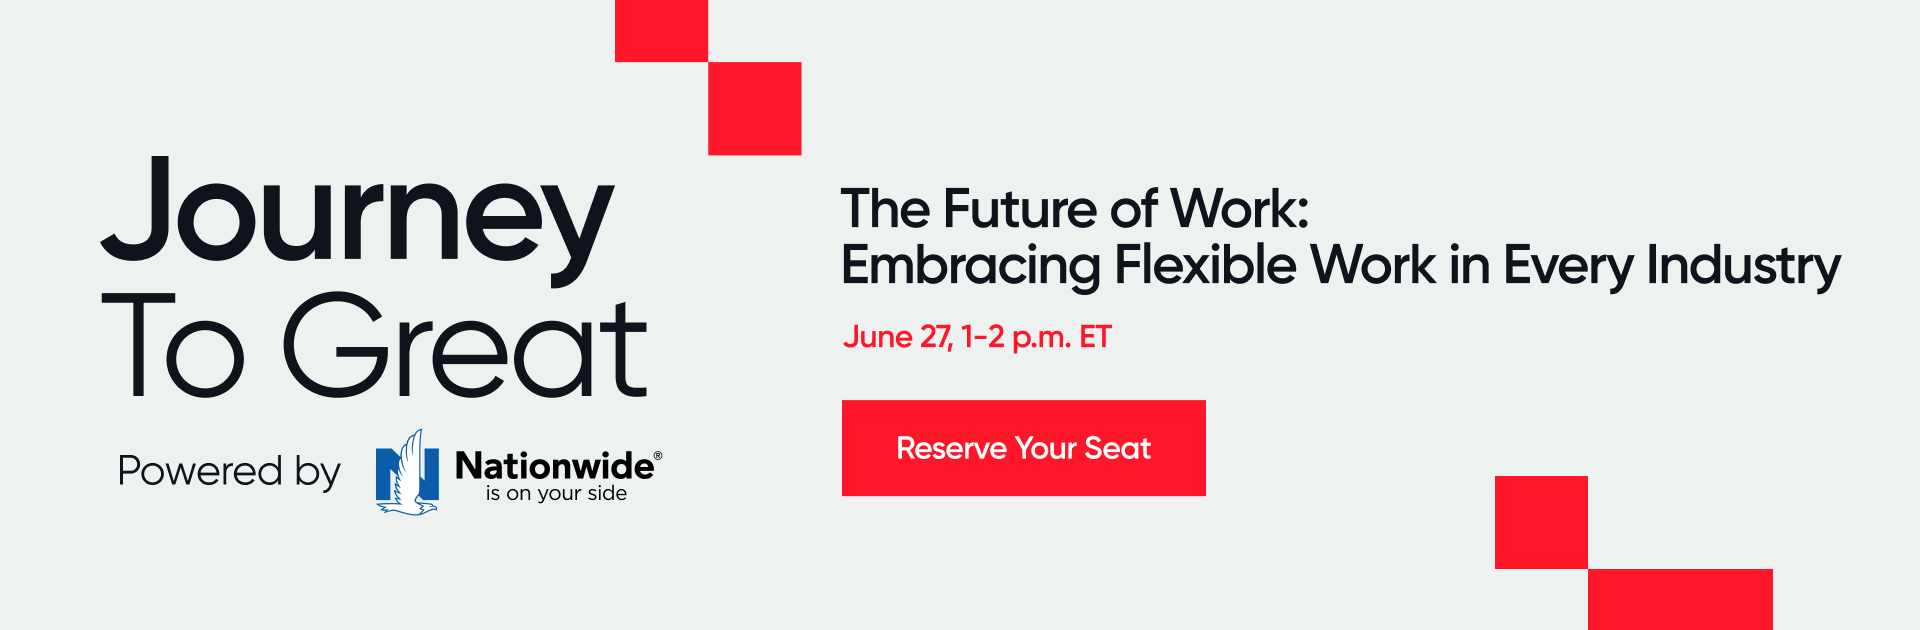 The Future of Work: Embracing Flexible Work in Every Industry